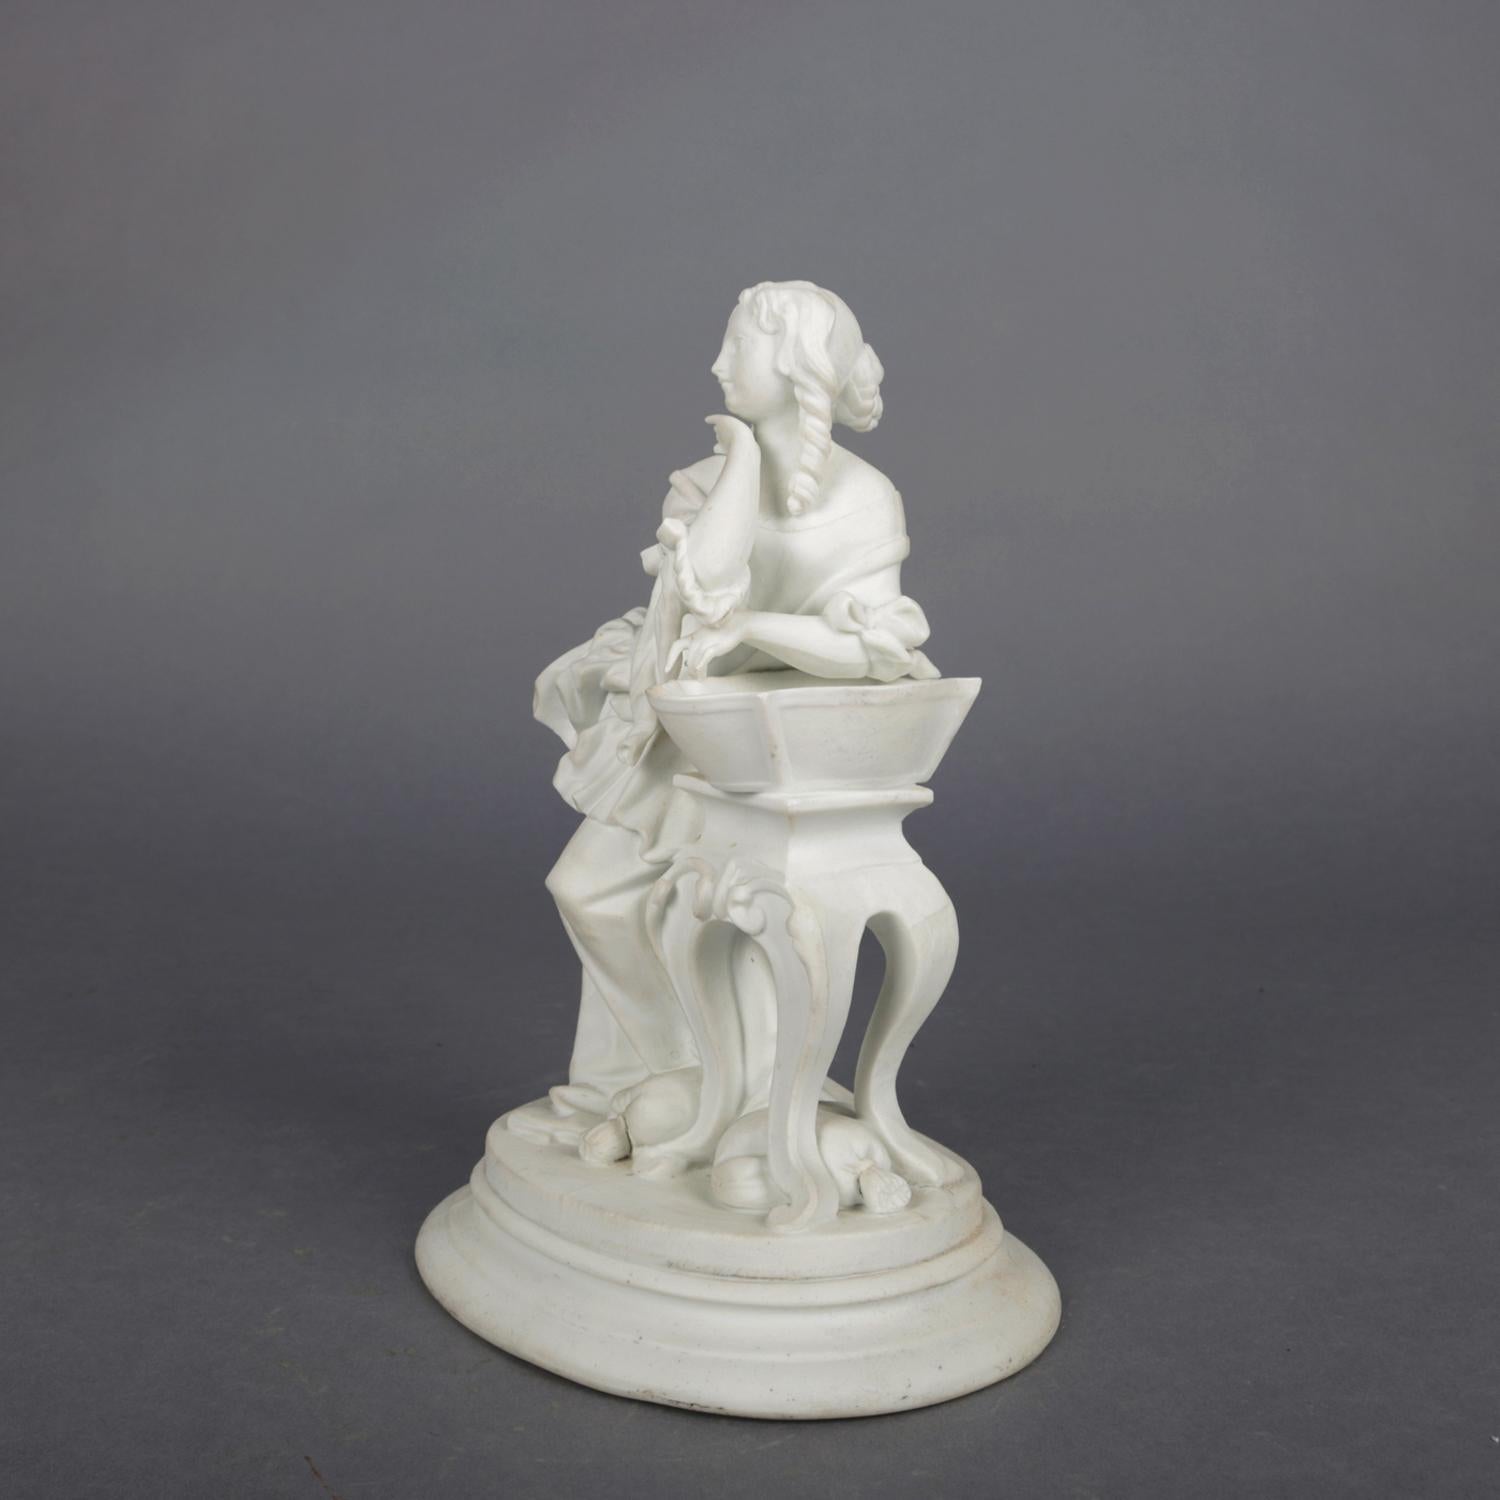 An antique English parian bisque figural grouping depicts a genre scene of woman standing over sand with wash bowl, maker mark on base as photographed, 19th century.

***DELIVERY NOTICE – Due to COVID-19 we are employing NO-CONTACT PRACTICES in the